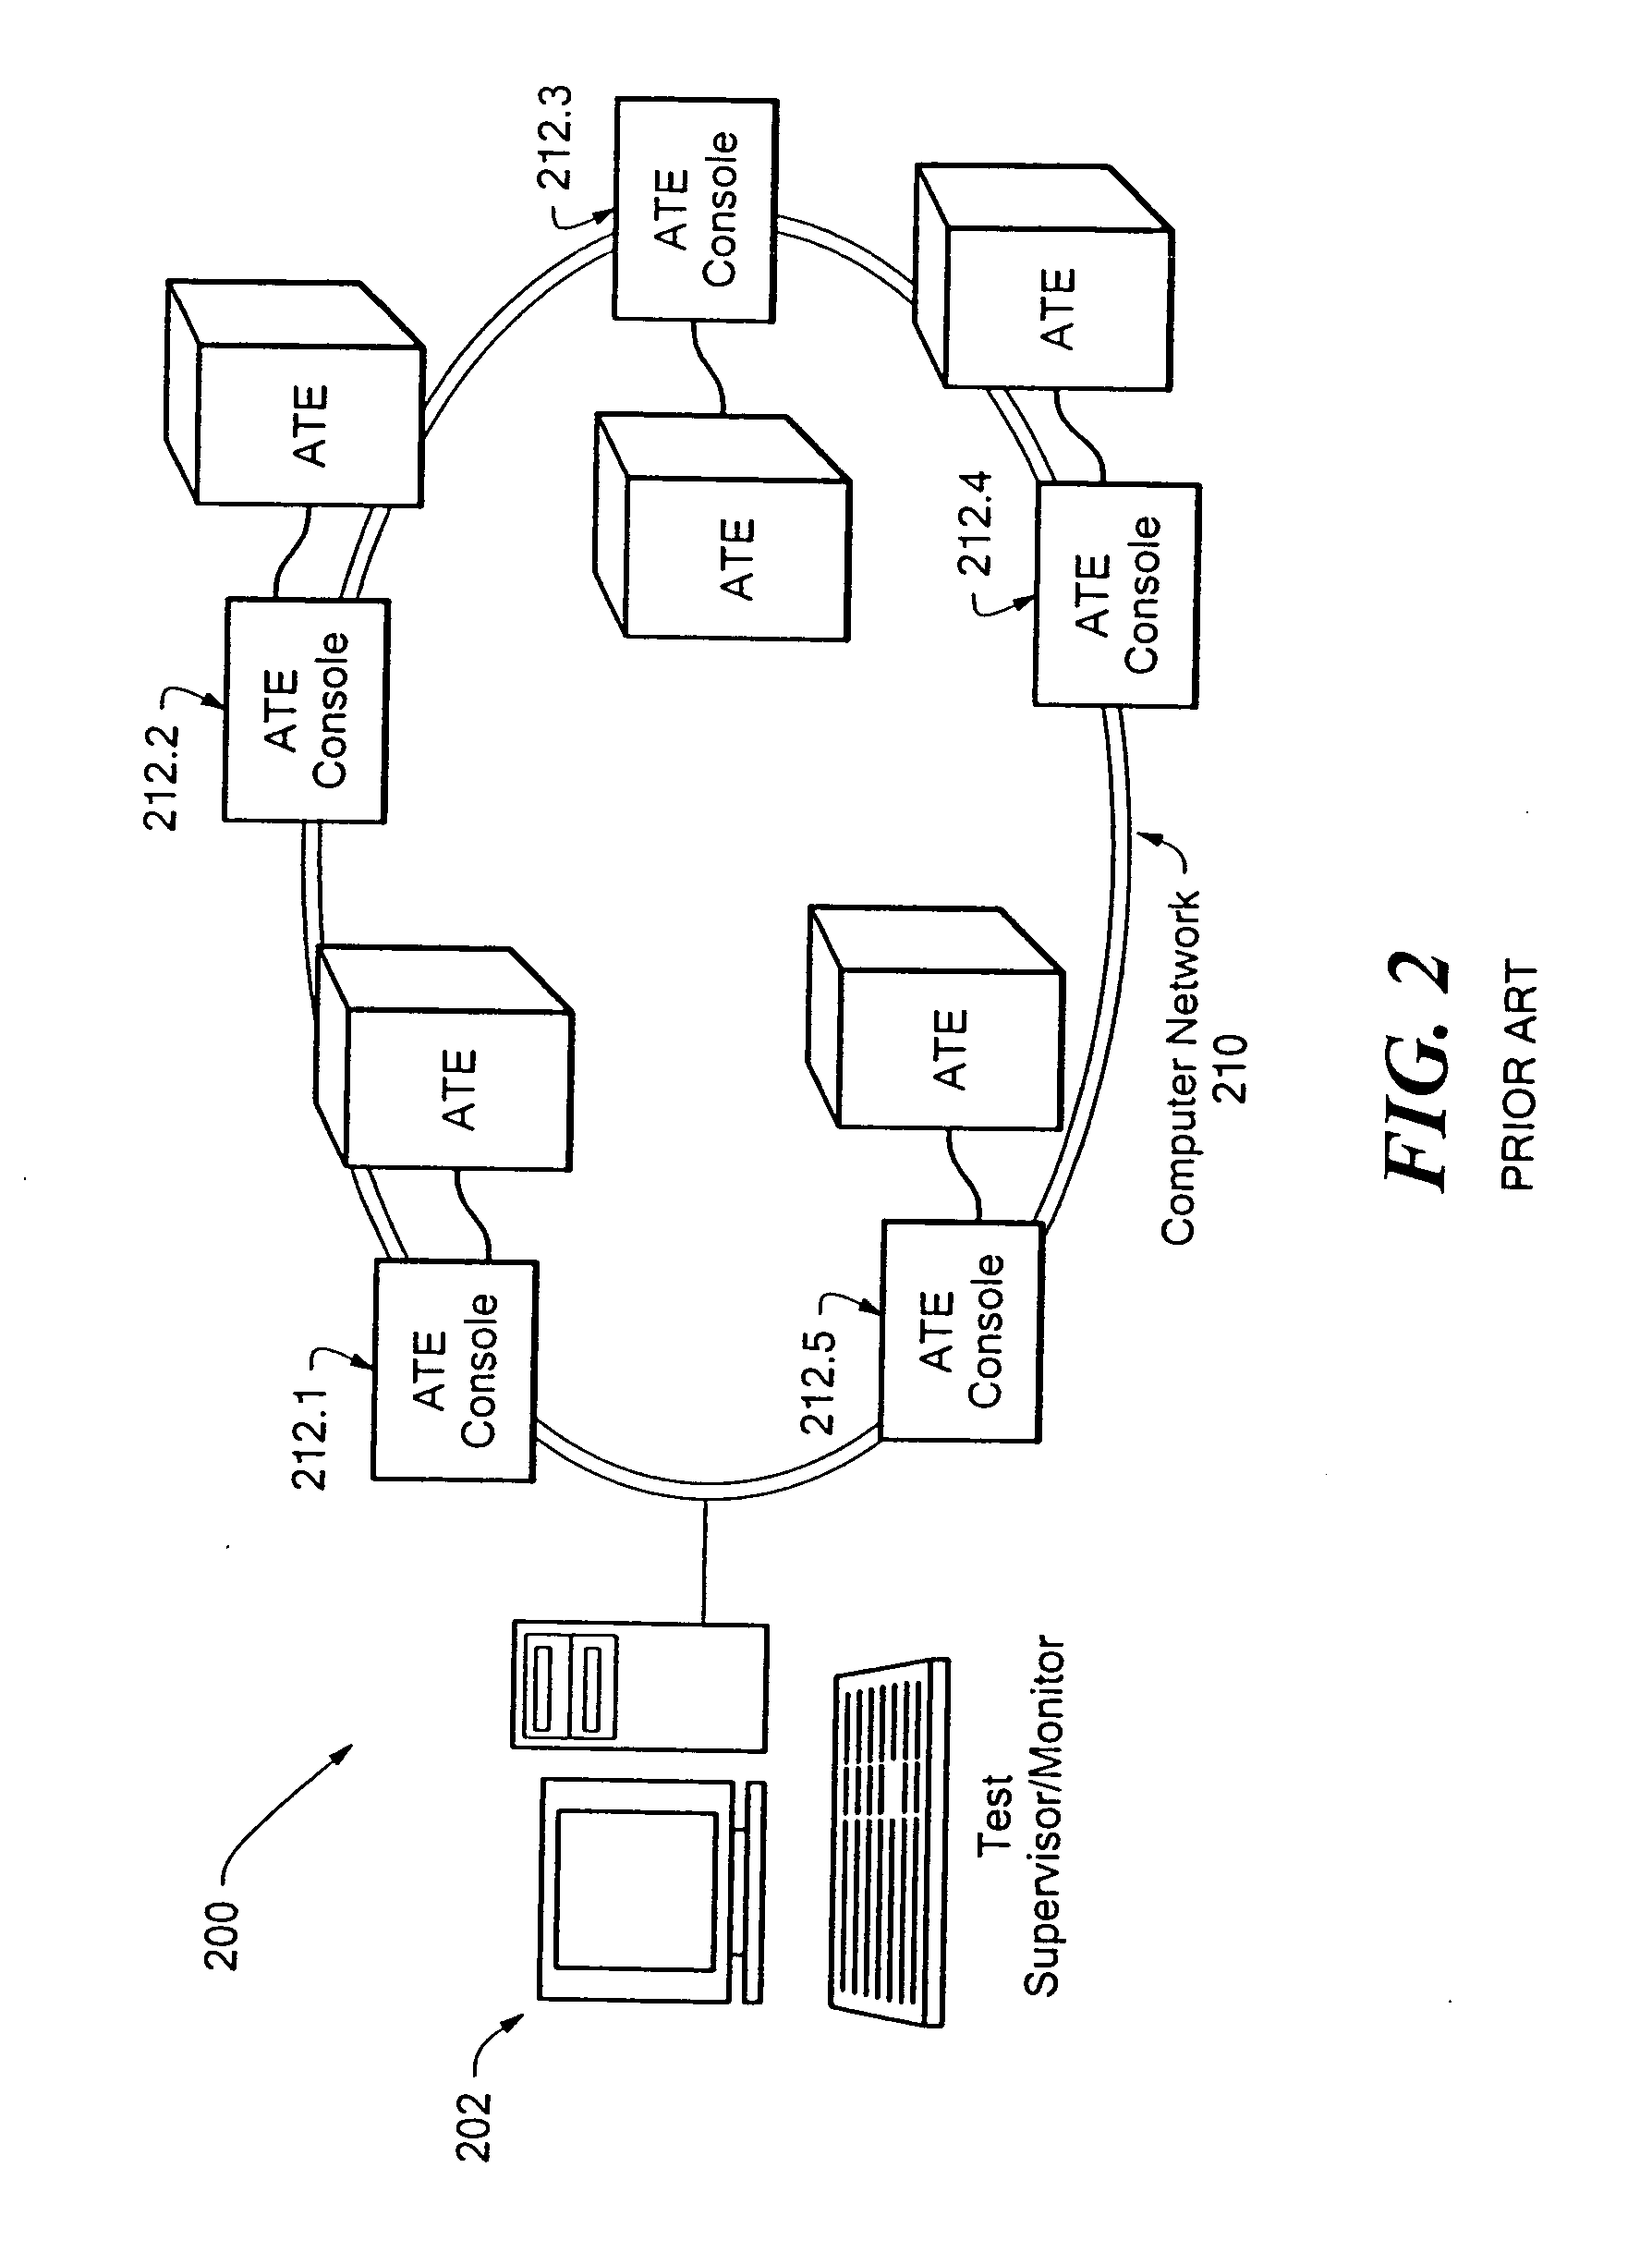 System and method for optimized test and configuration throughput of electronic circuits